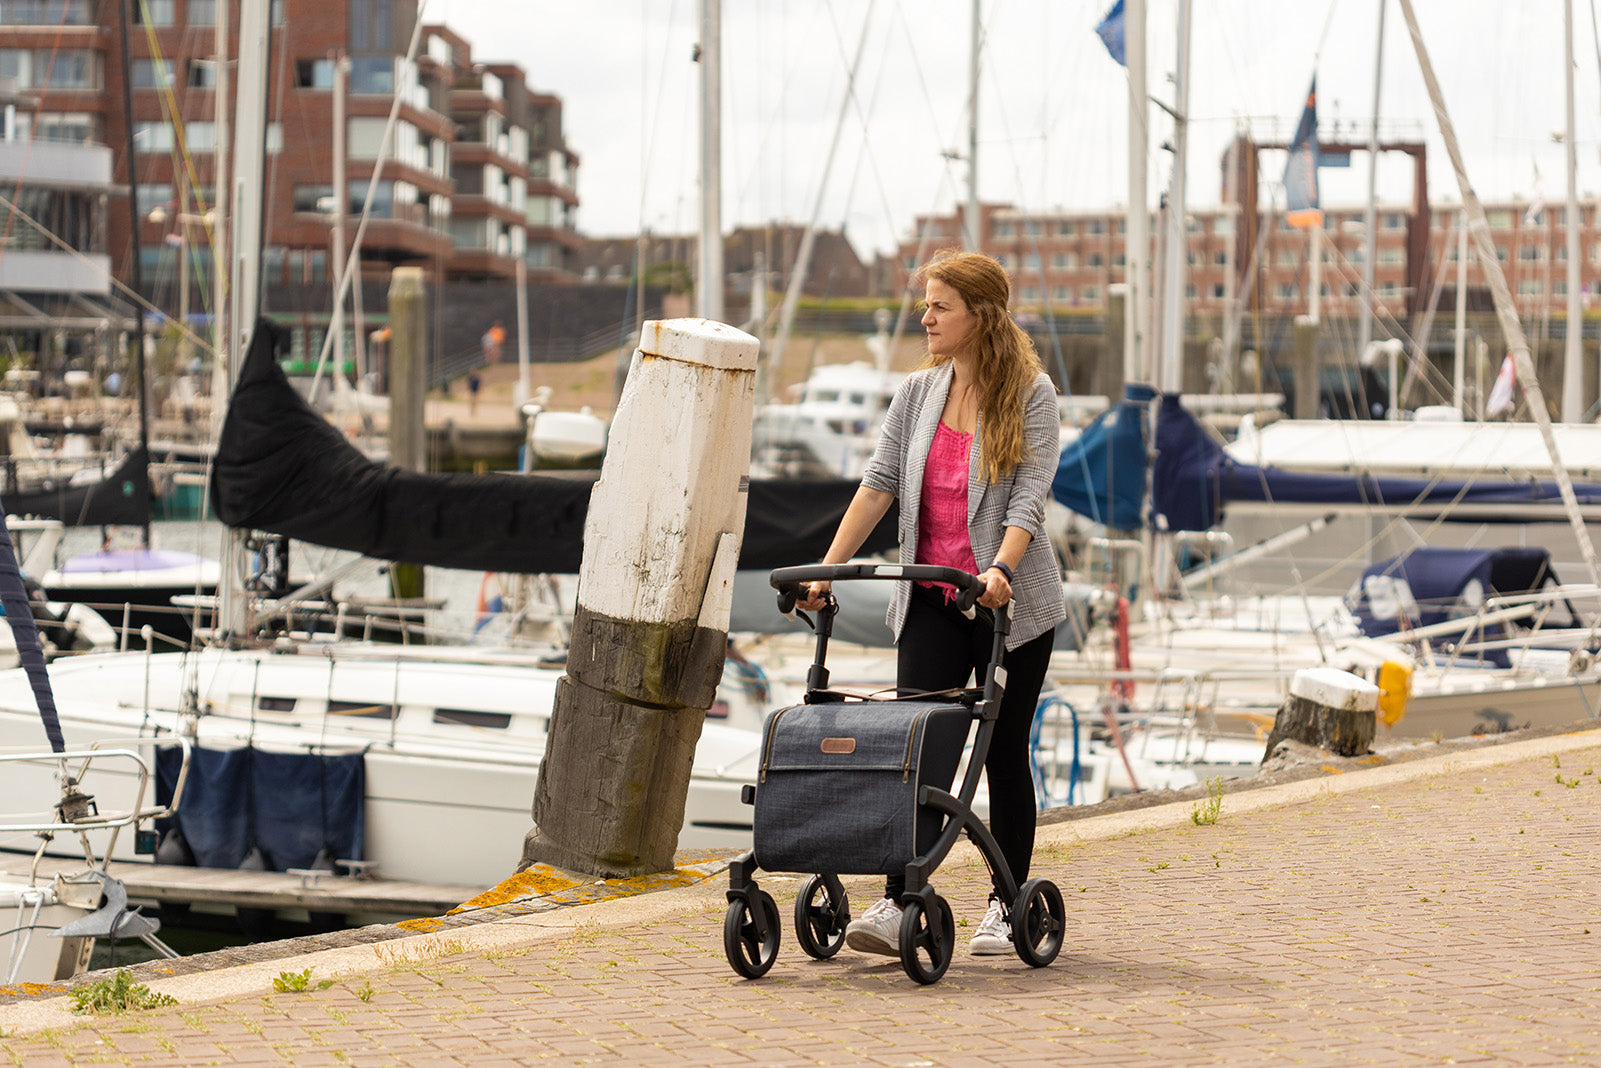 A young woman walks along dock side with the Rollz Flex Walker Rollator with boats in the background.